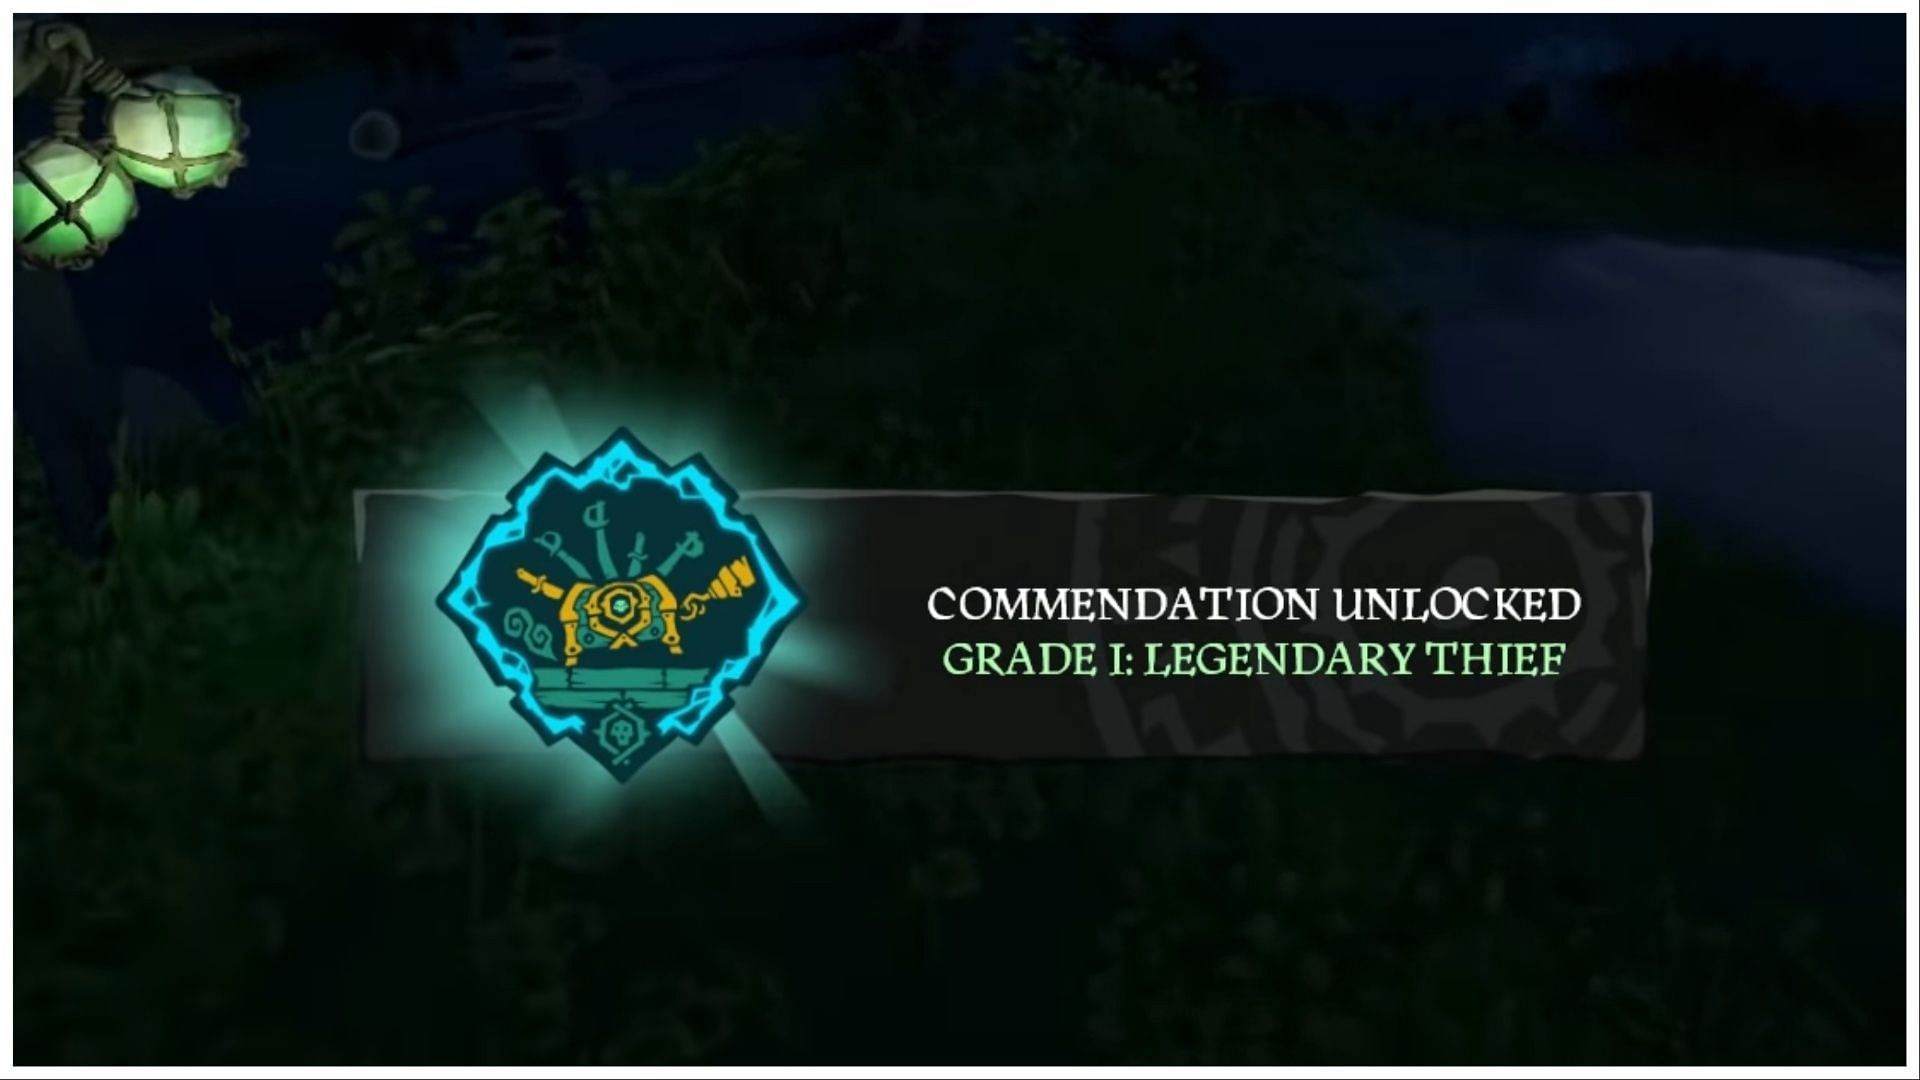 Legendary Thief commendation in Sea of Thieves (Image via Rare/ PhuzzyBond on YouTube)